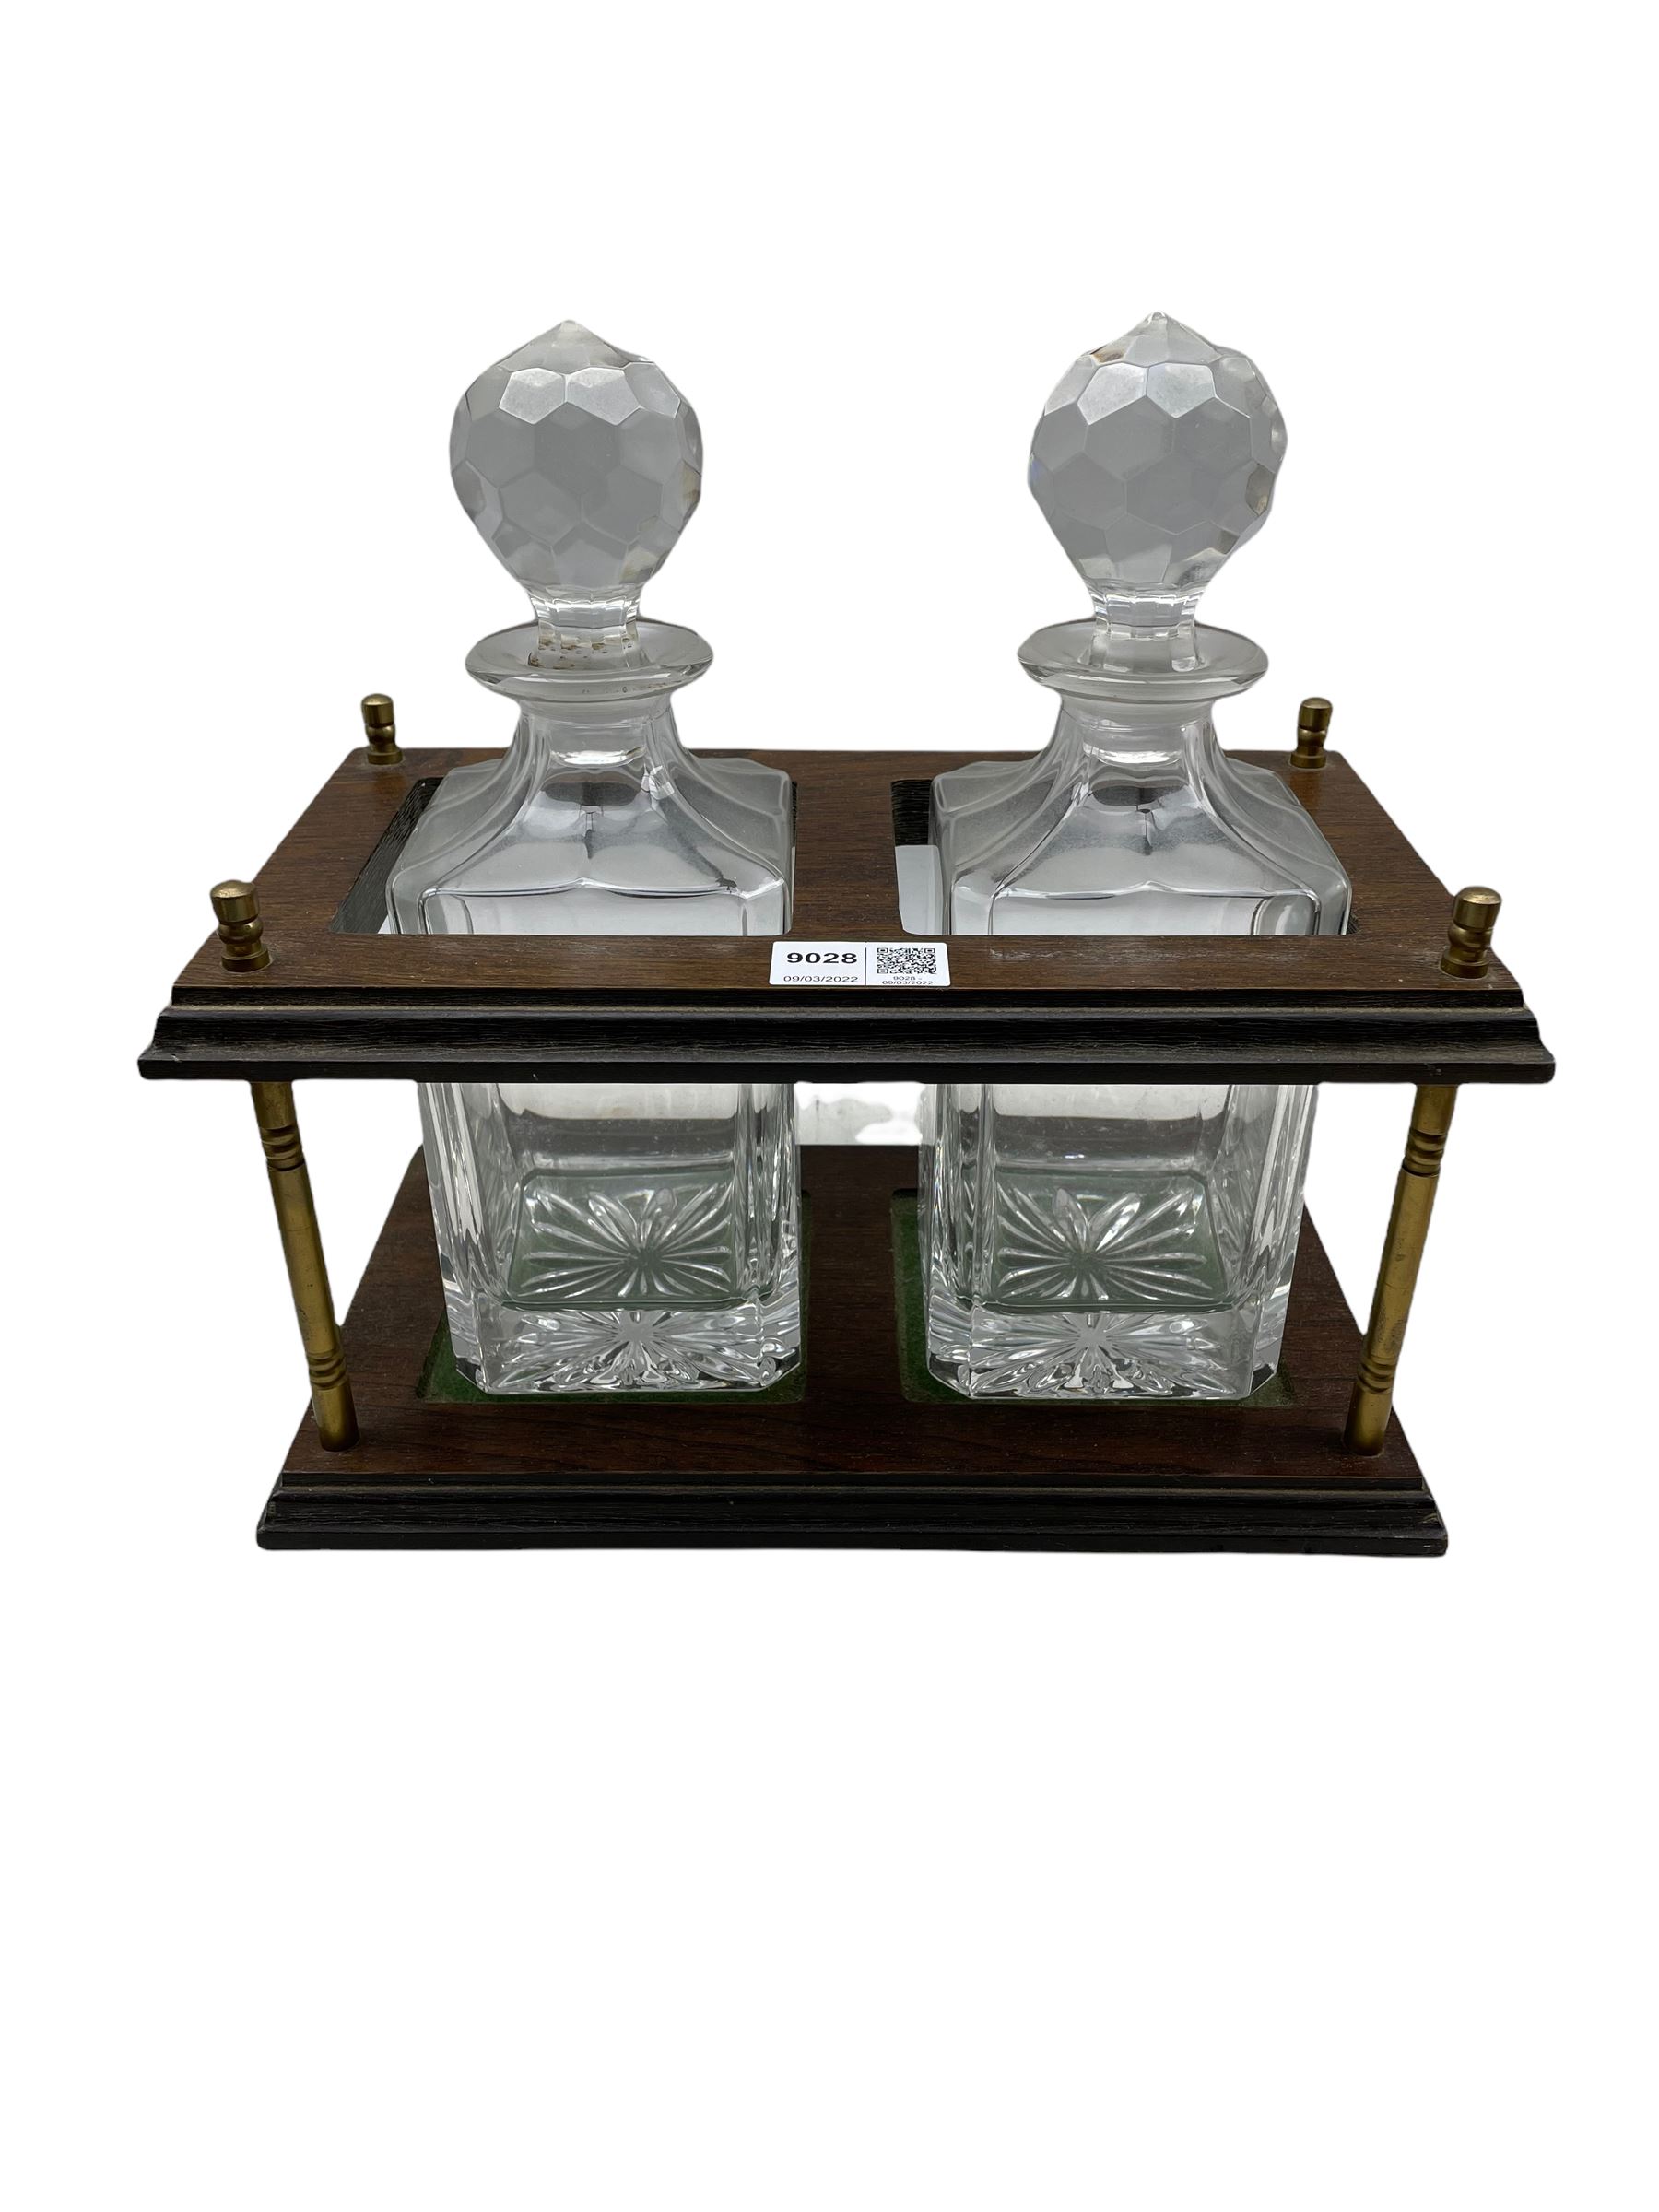 20th century decanter stand with two glass decanters L30cm